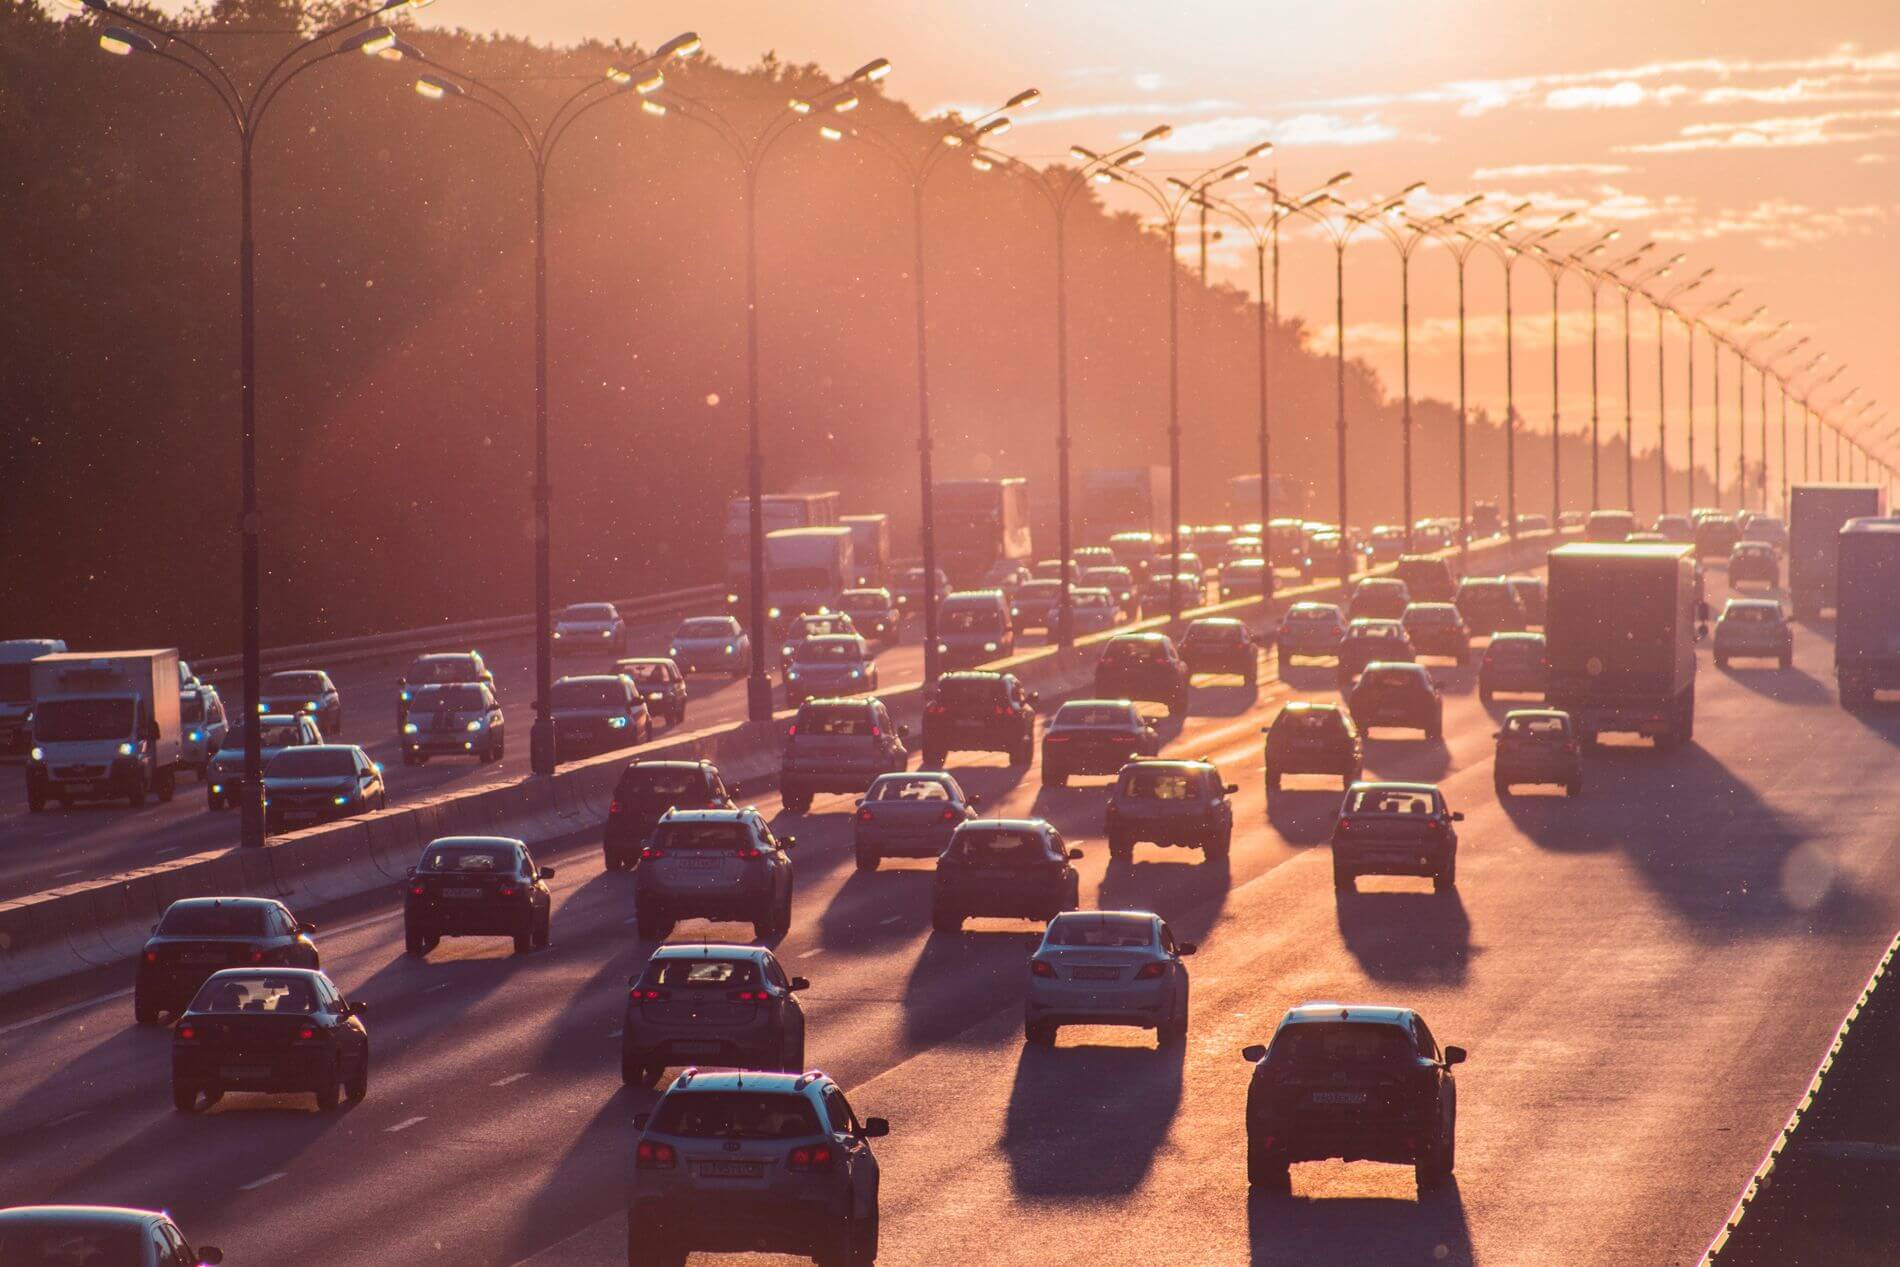 The Morning Commute doesn't have to be rough when insured with A Better Choice Auto Insurance.